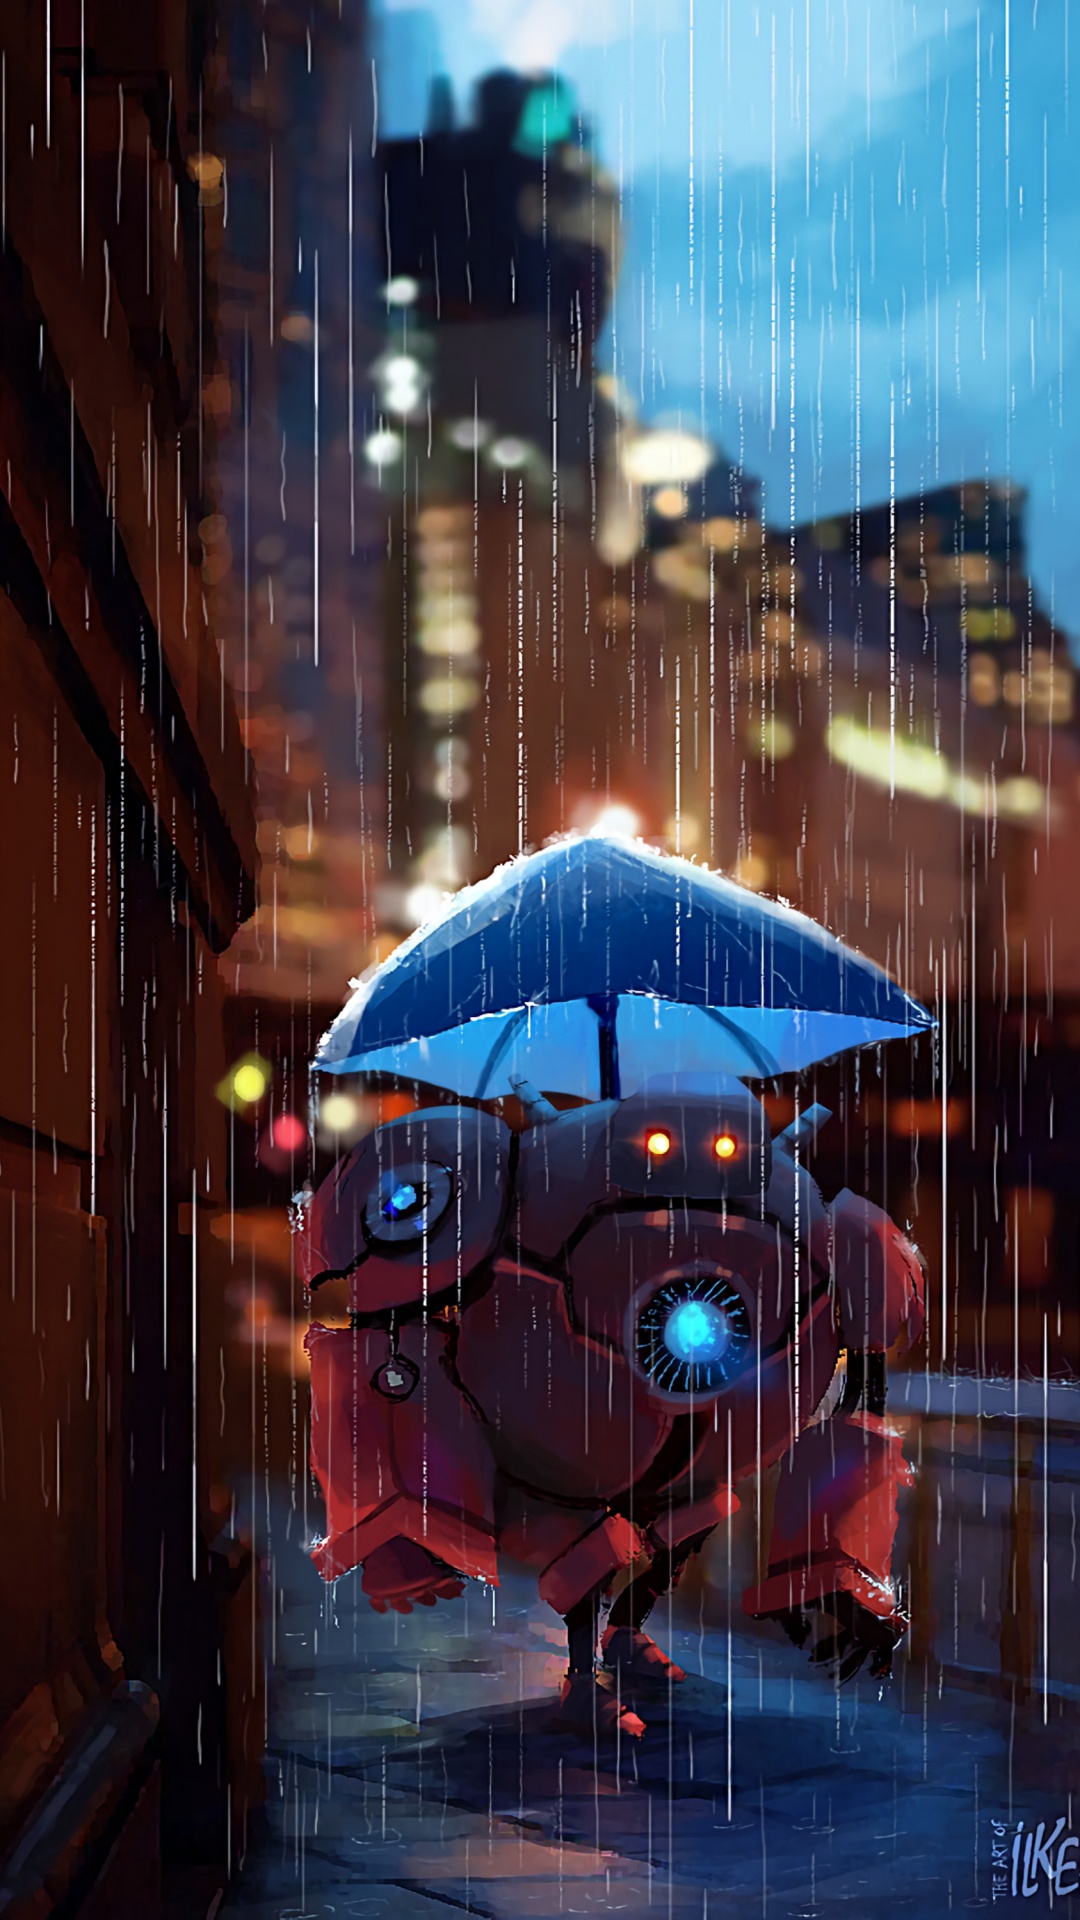 Blue Umbrella in The City During Night Time. Wallpaper in 1080x1920 Resolution